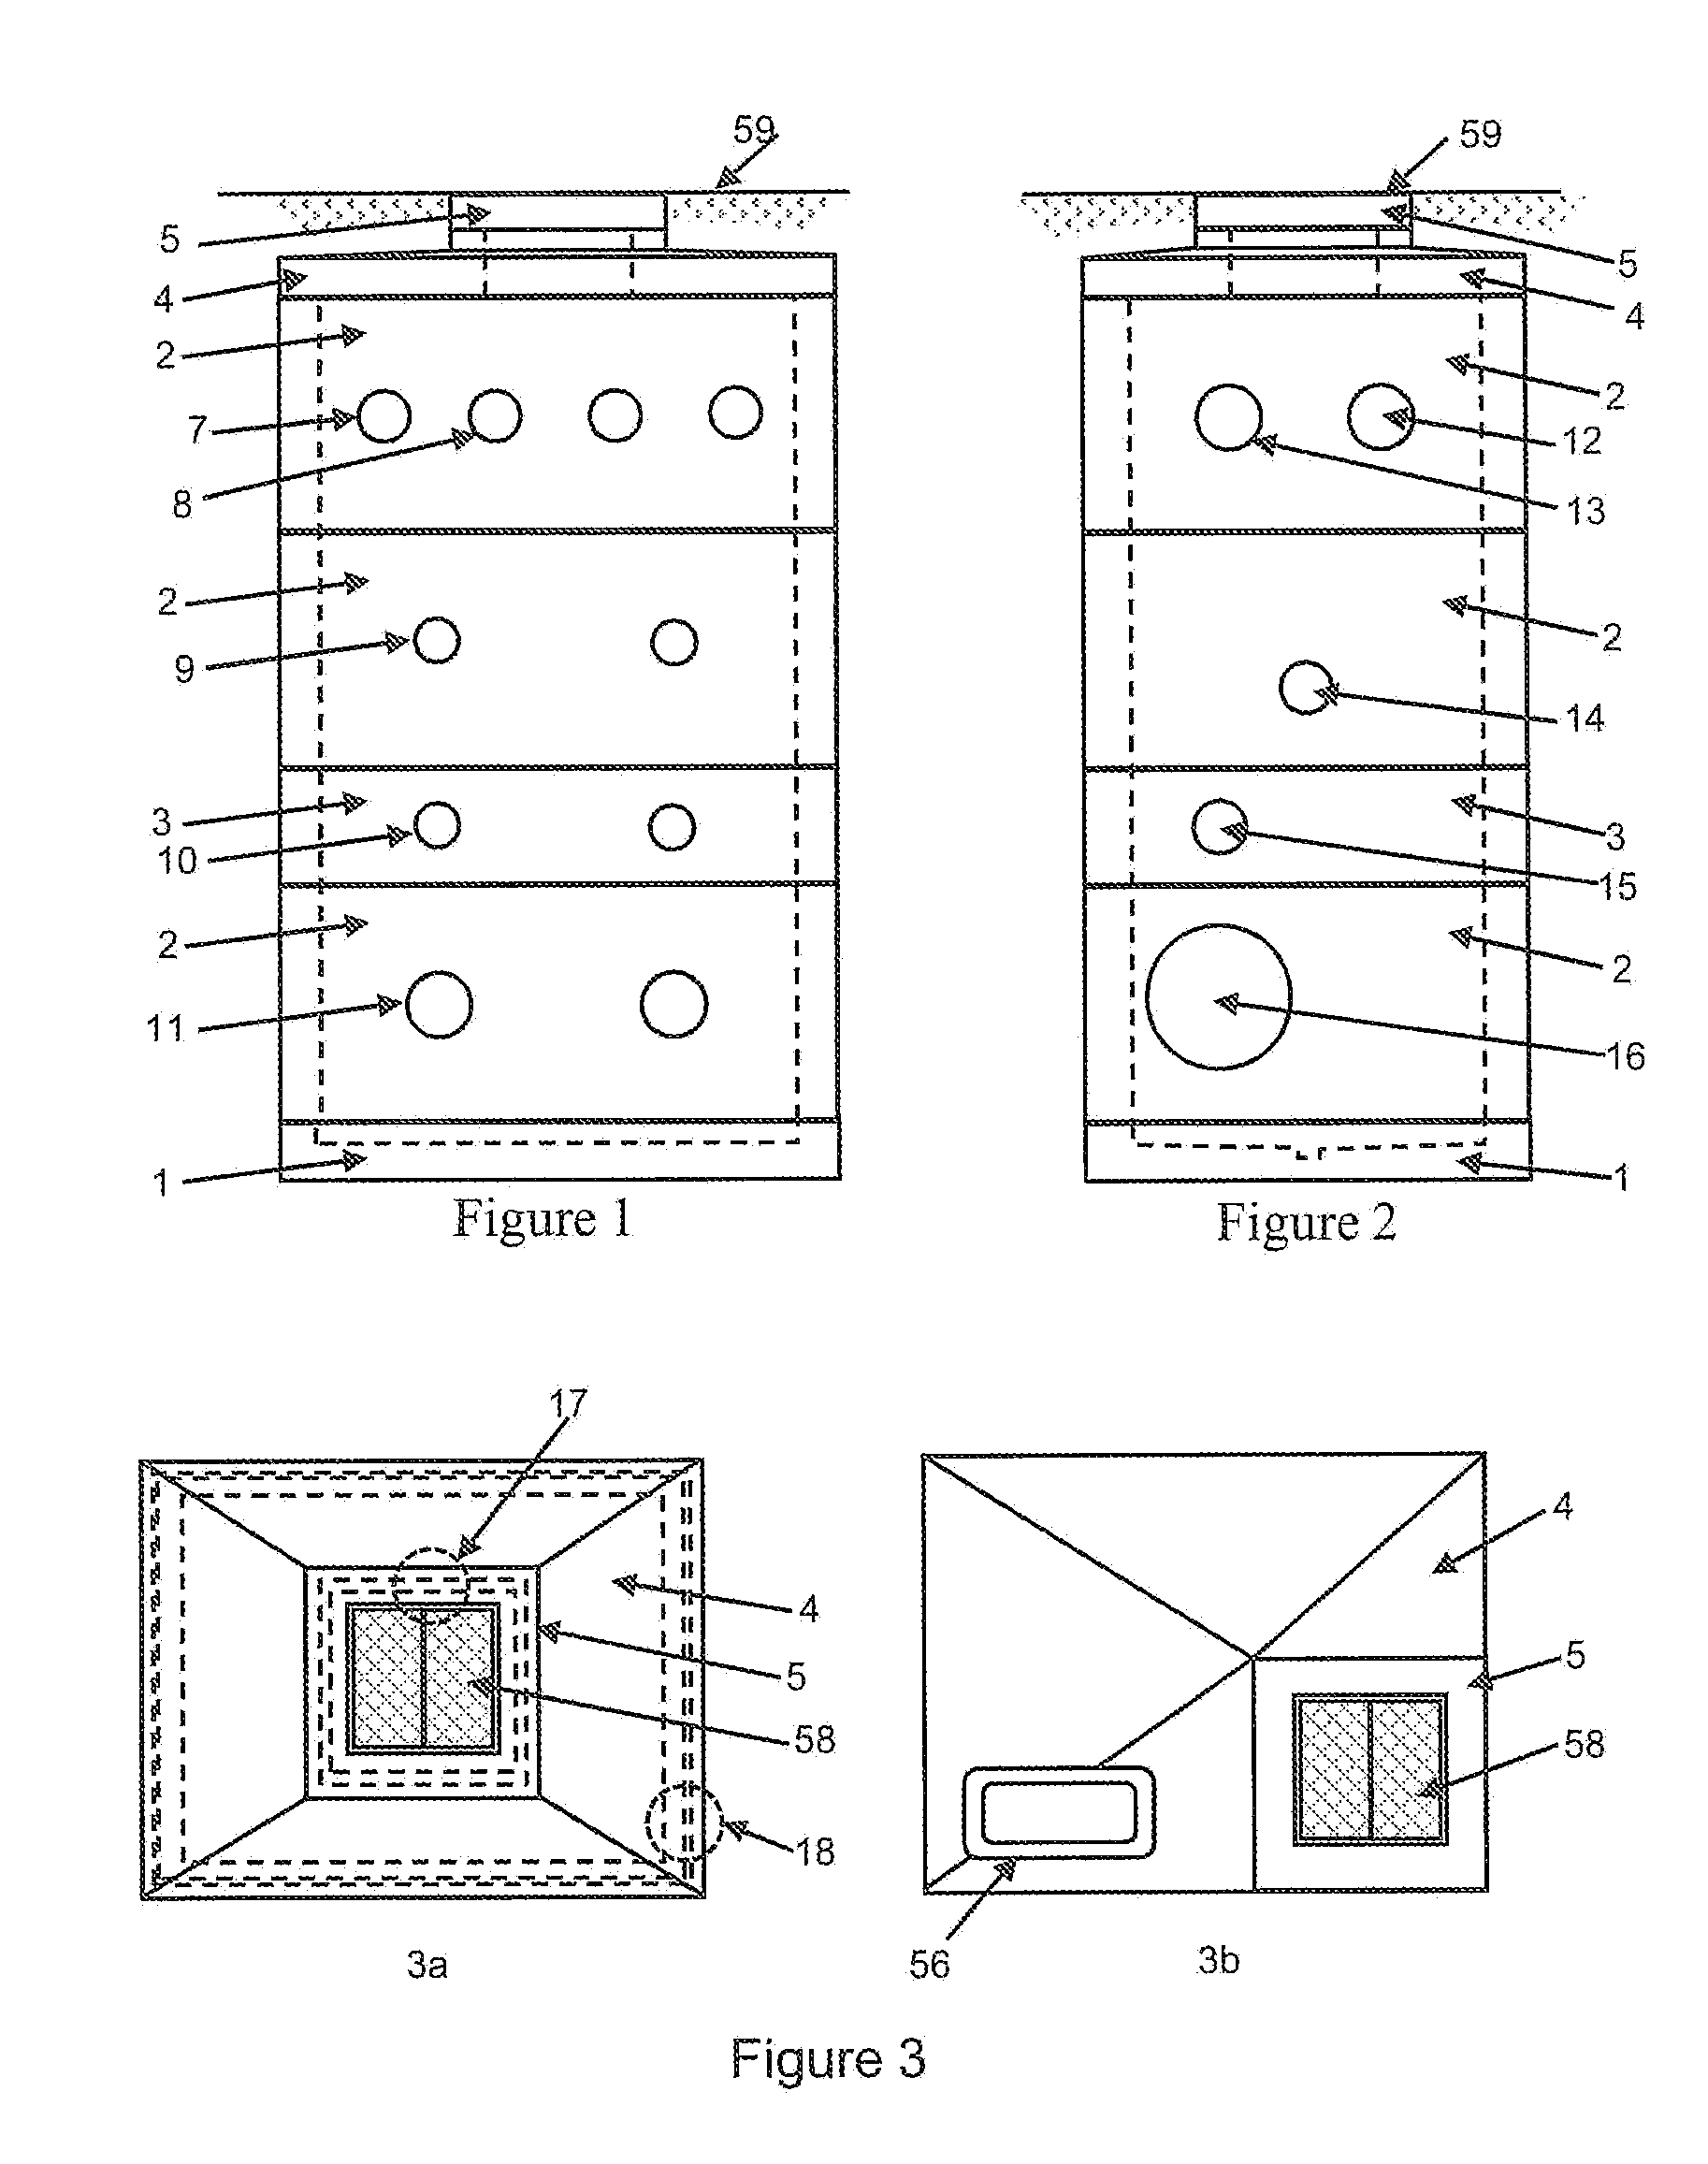 Modular Integrated Underground Utilities Enclosure and Distribution System